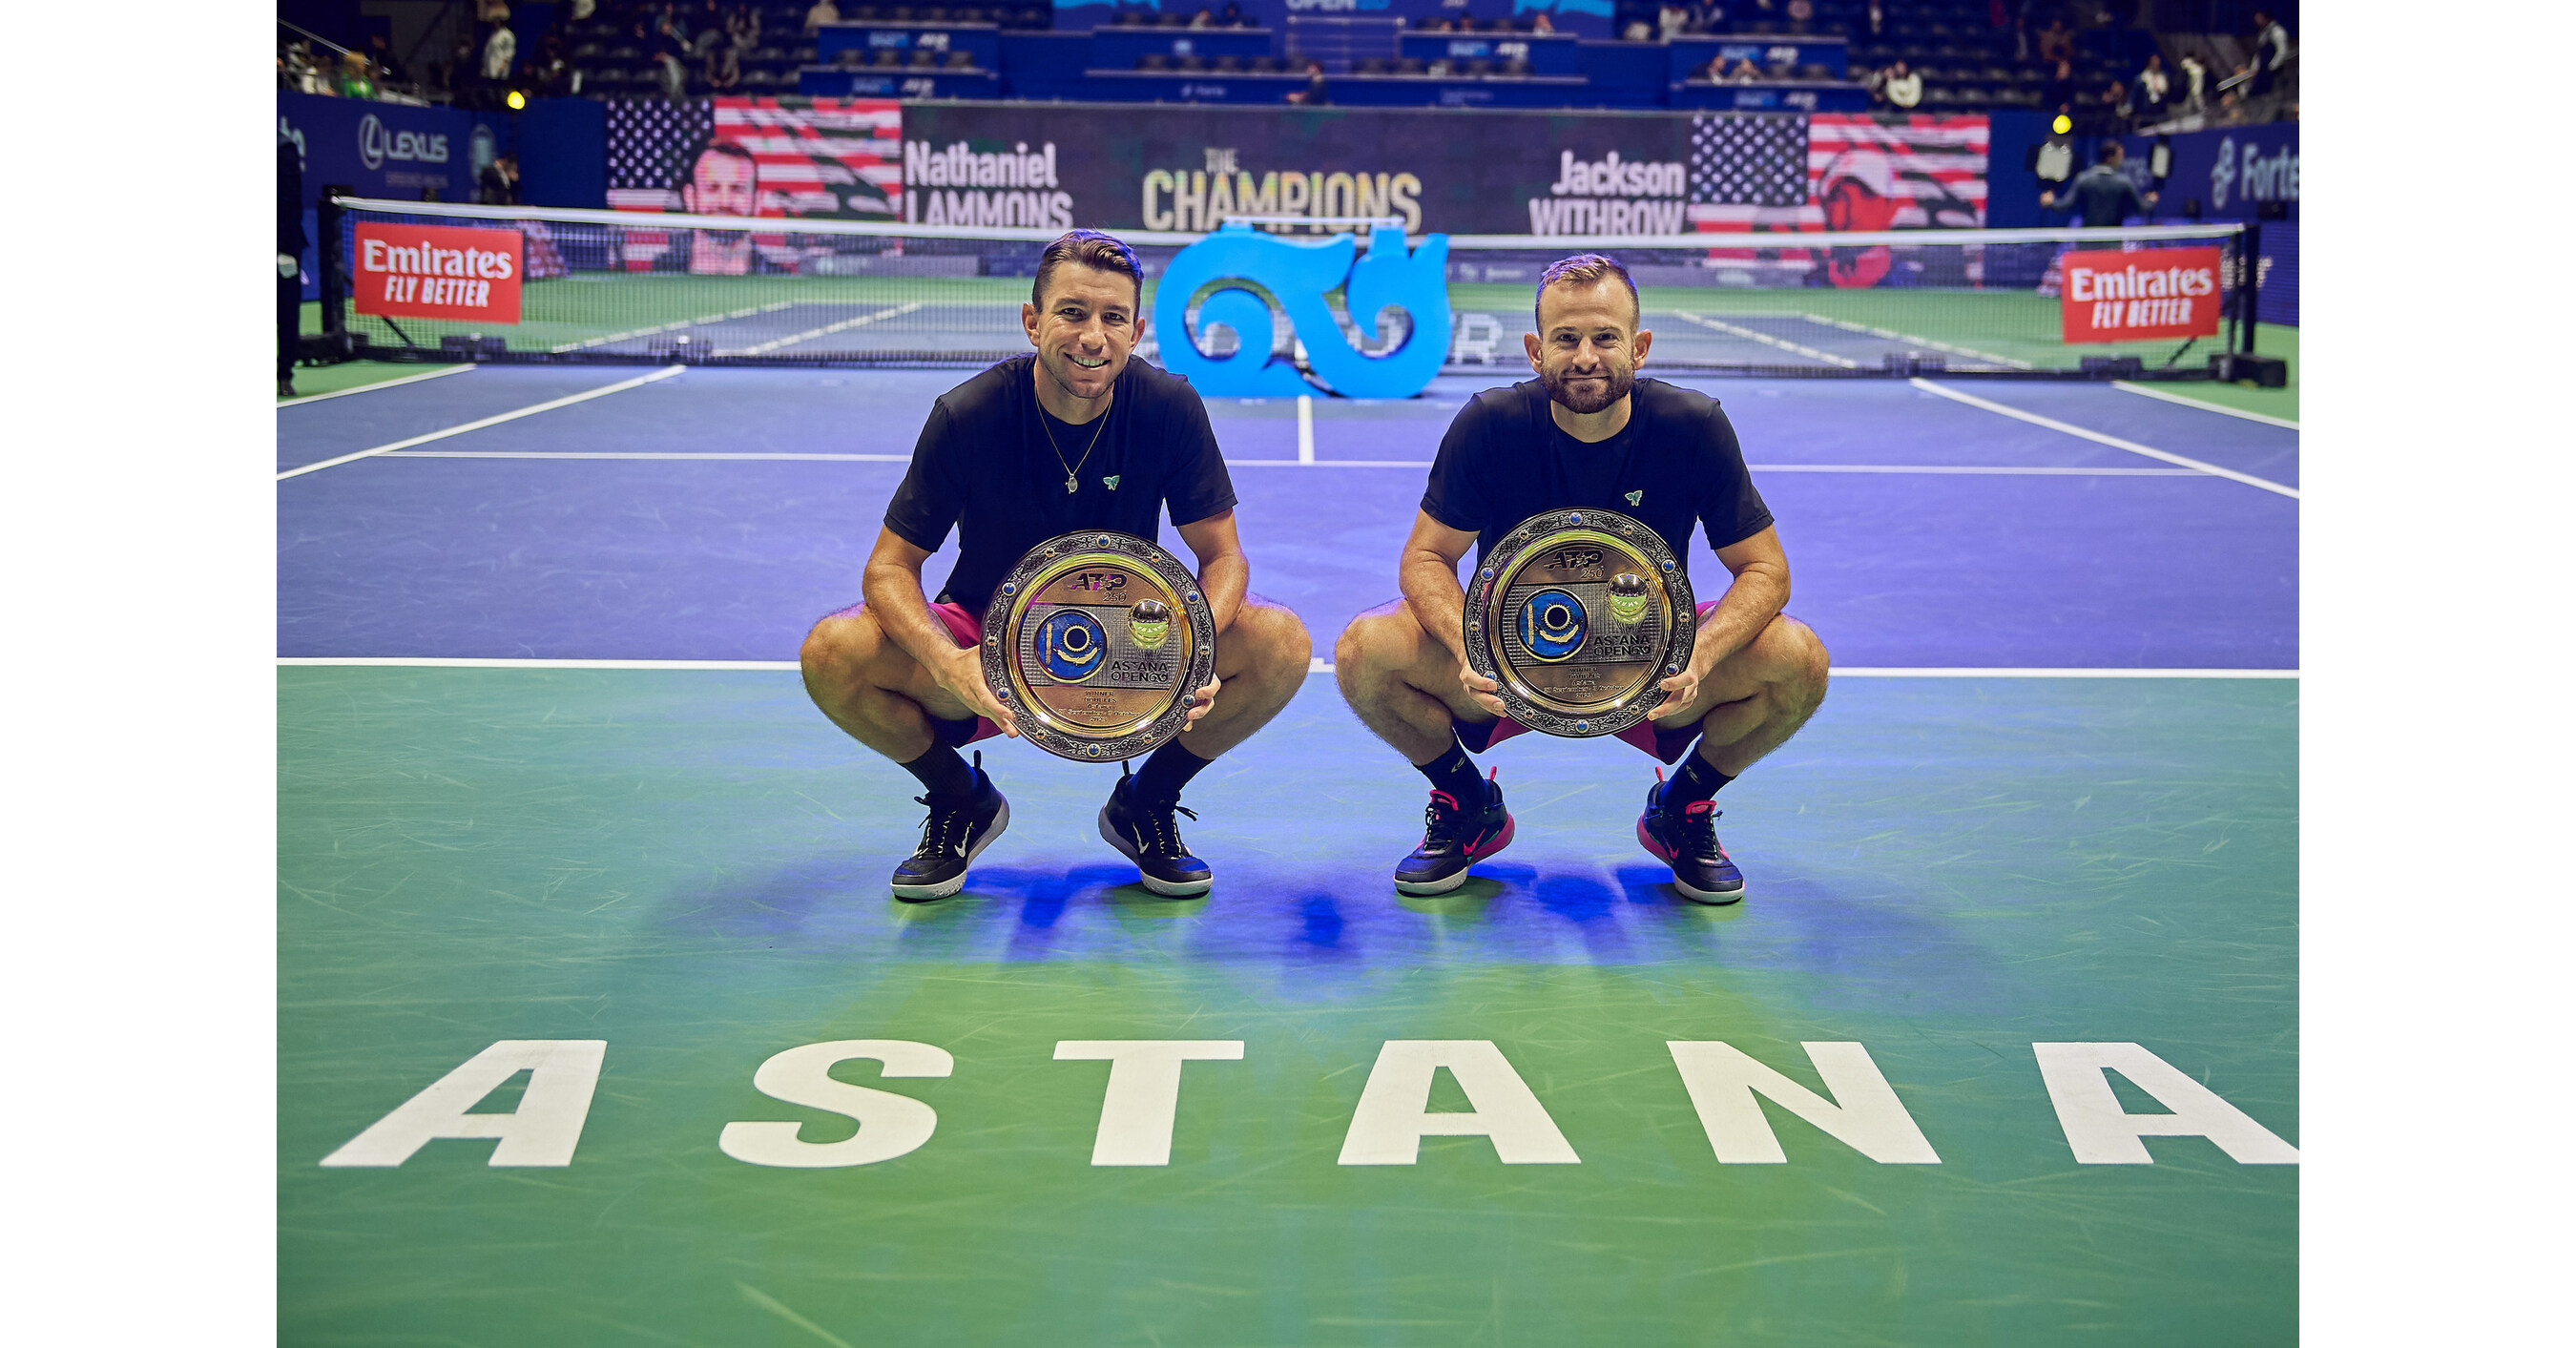 ATP 250 Astana Open Results & Tournament Overview